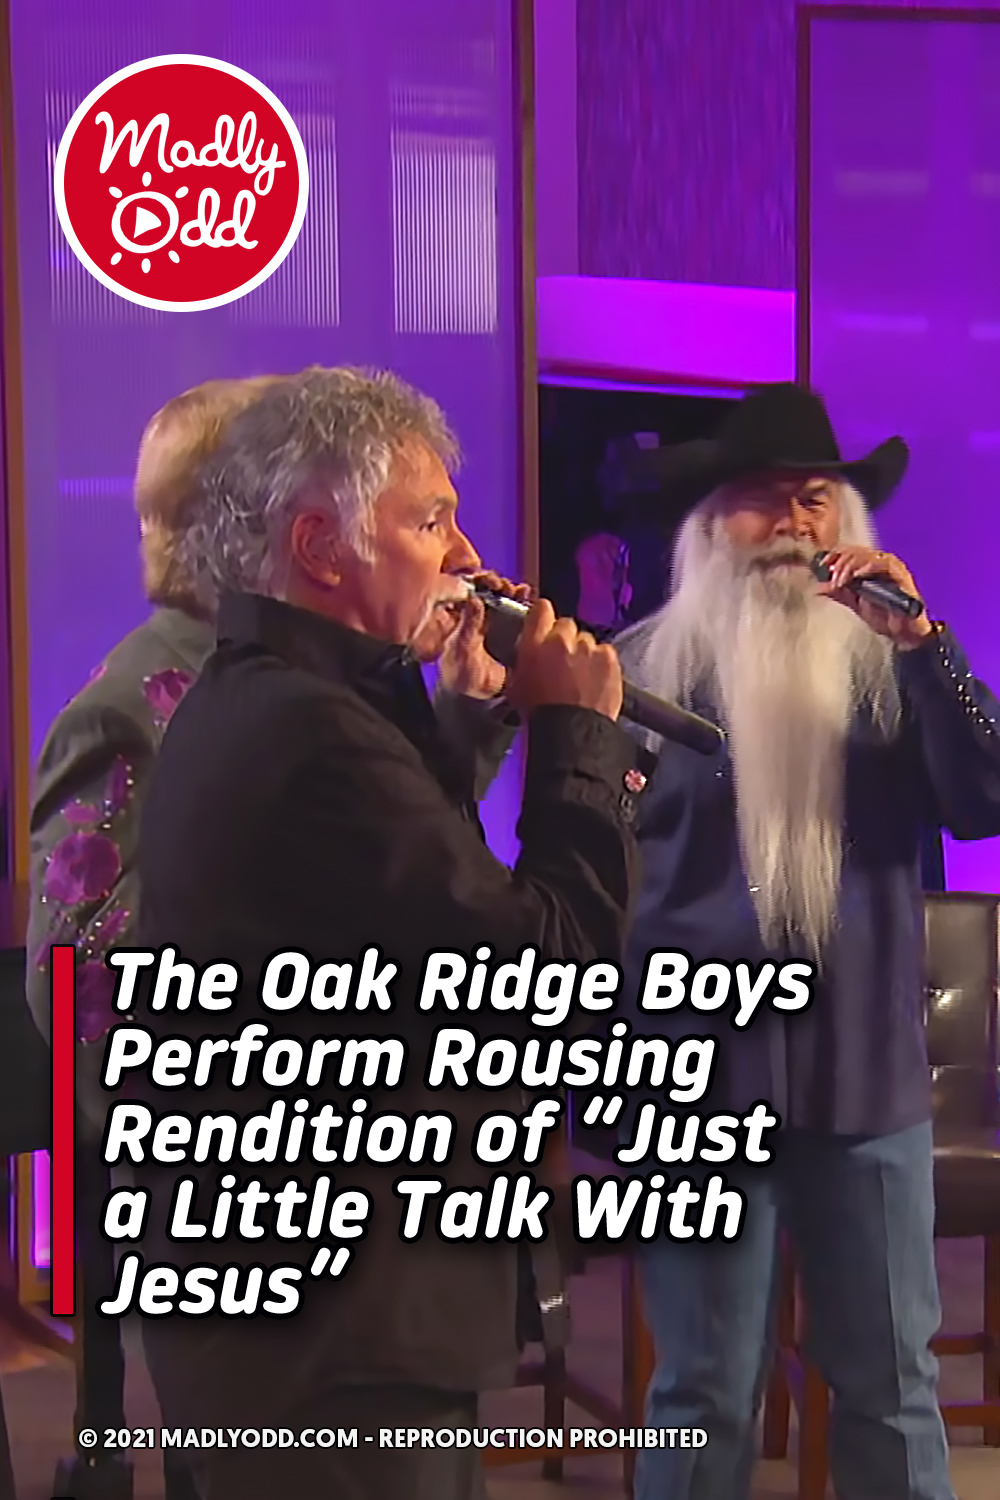 The Oak Ridge Boys Perform Rousing Rendition of “Just a Little Talk With Jesus”